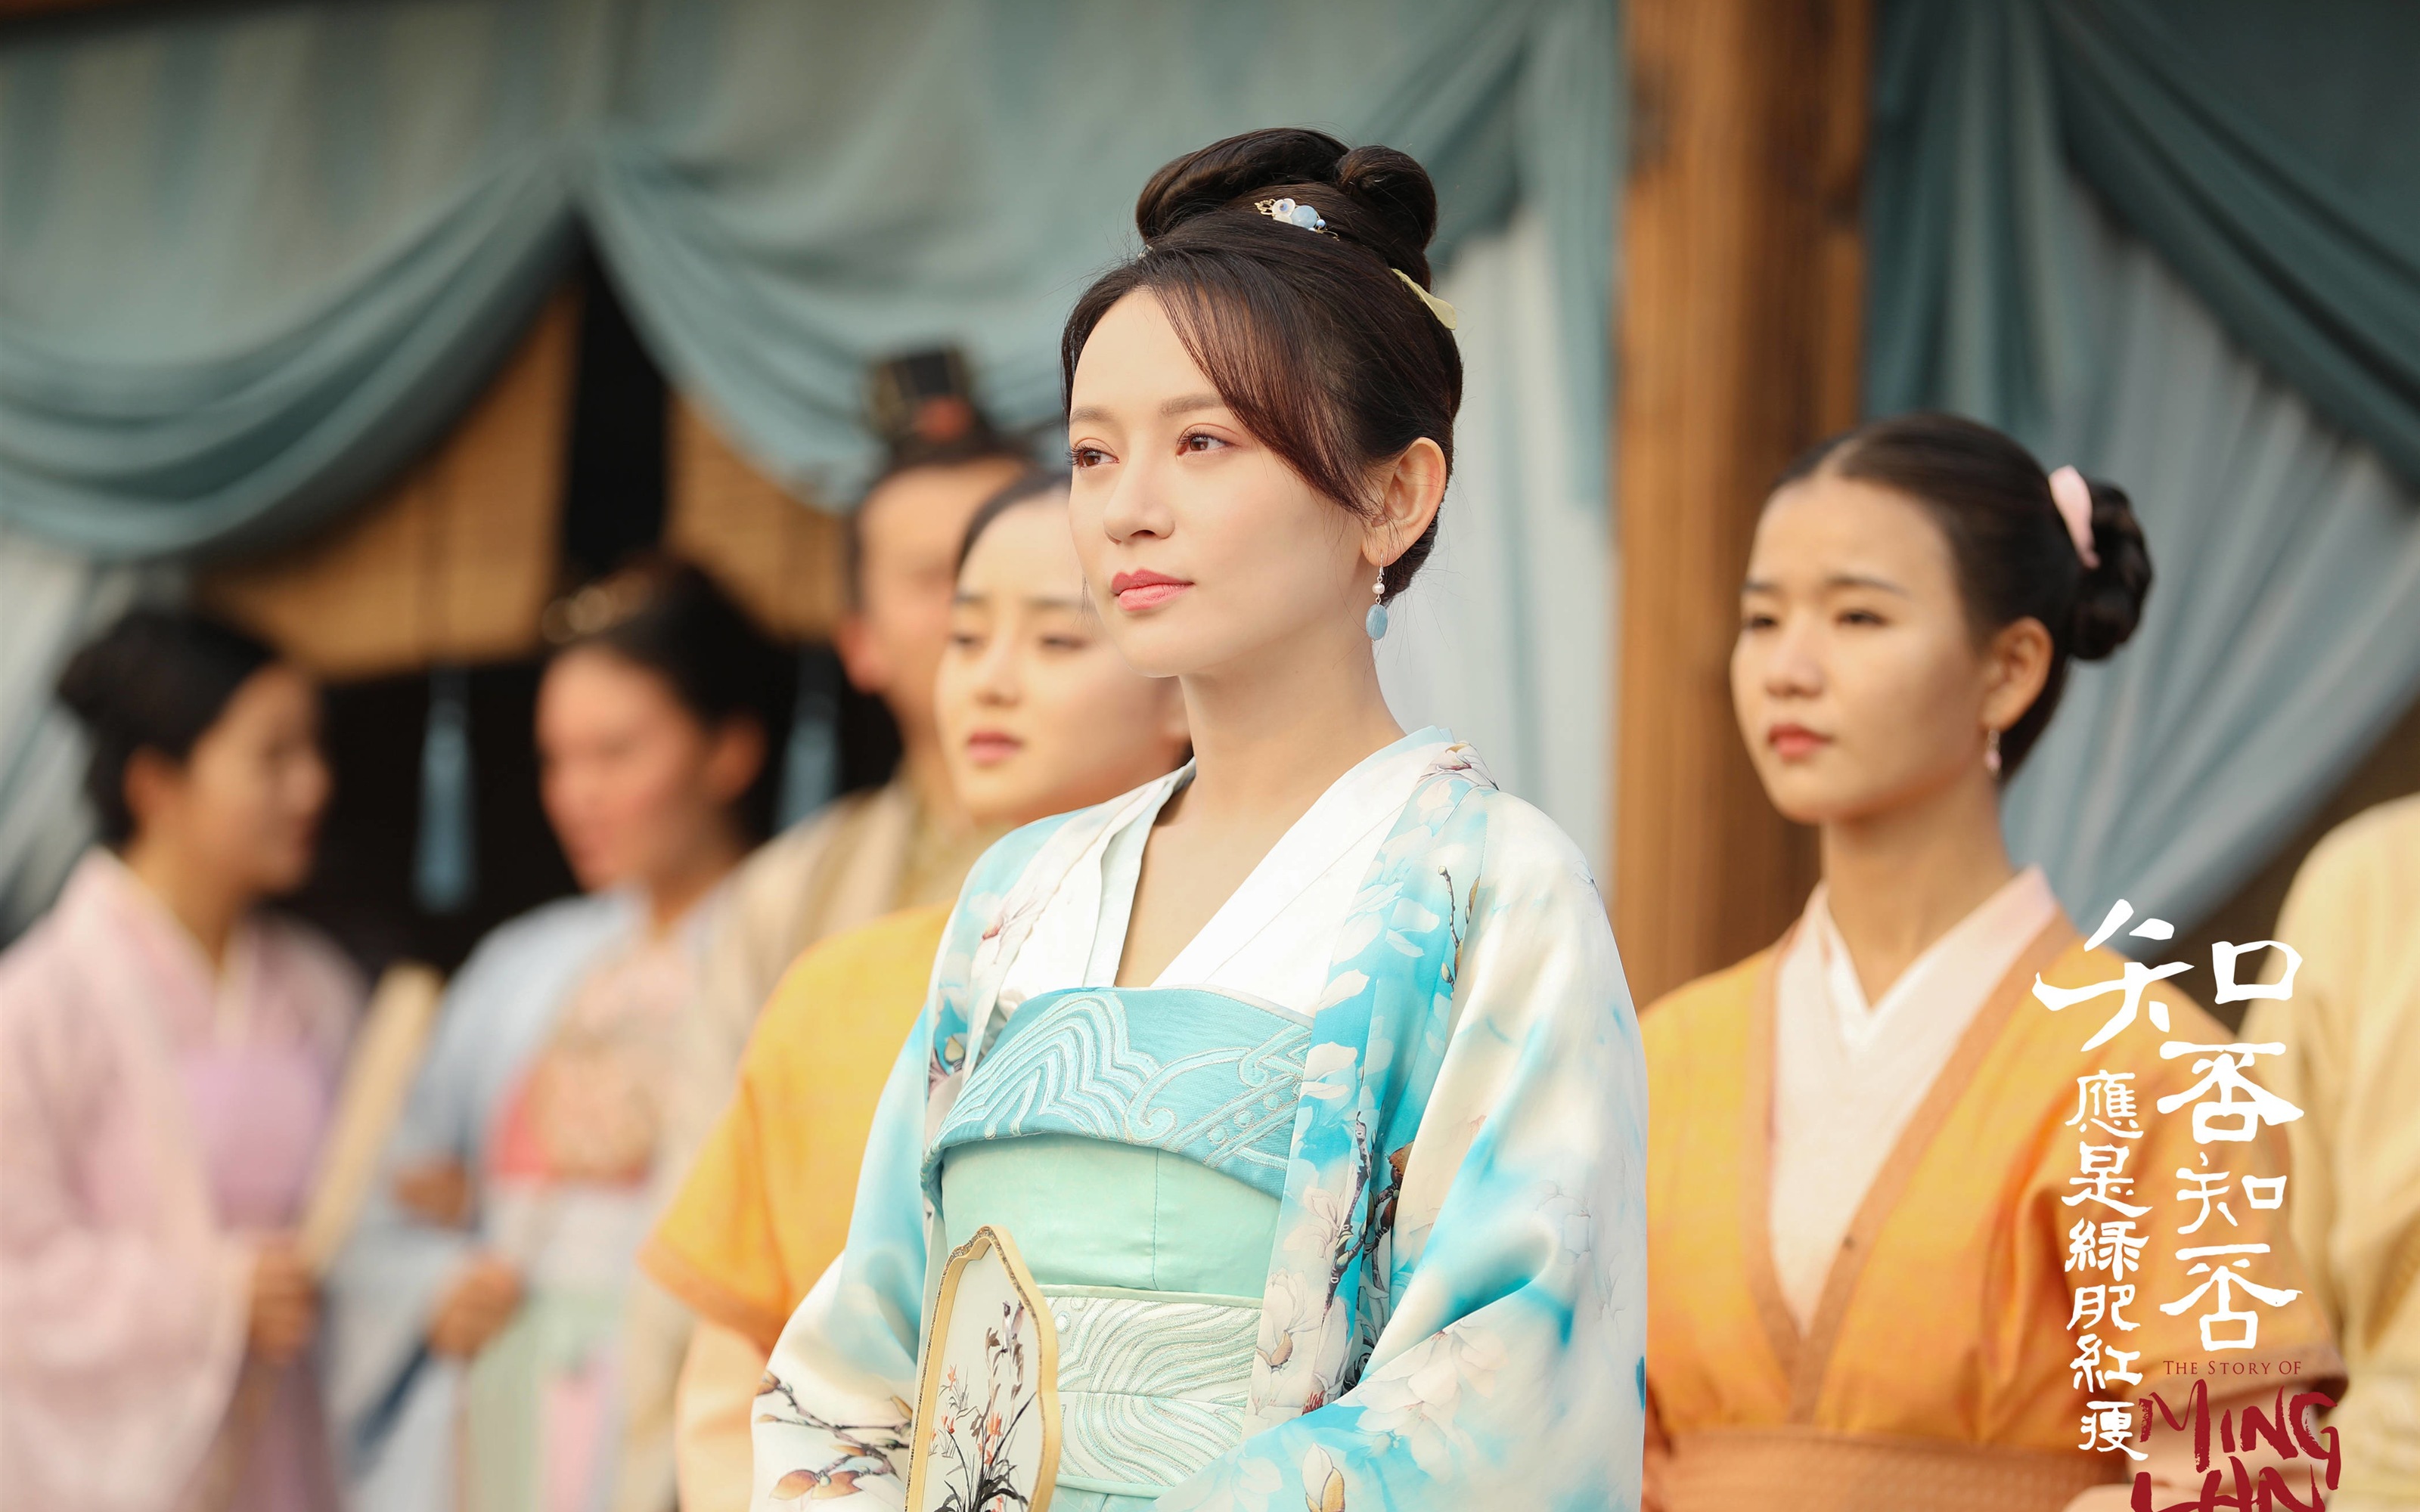 The Story Of MingLan, TV series HD wallpapers #22 - 3200x2000